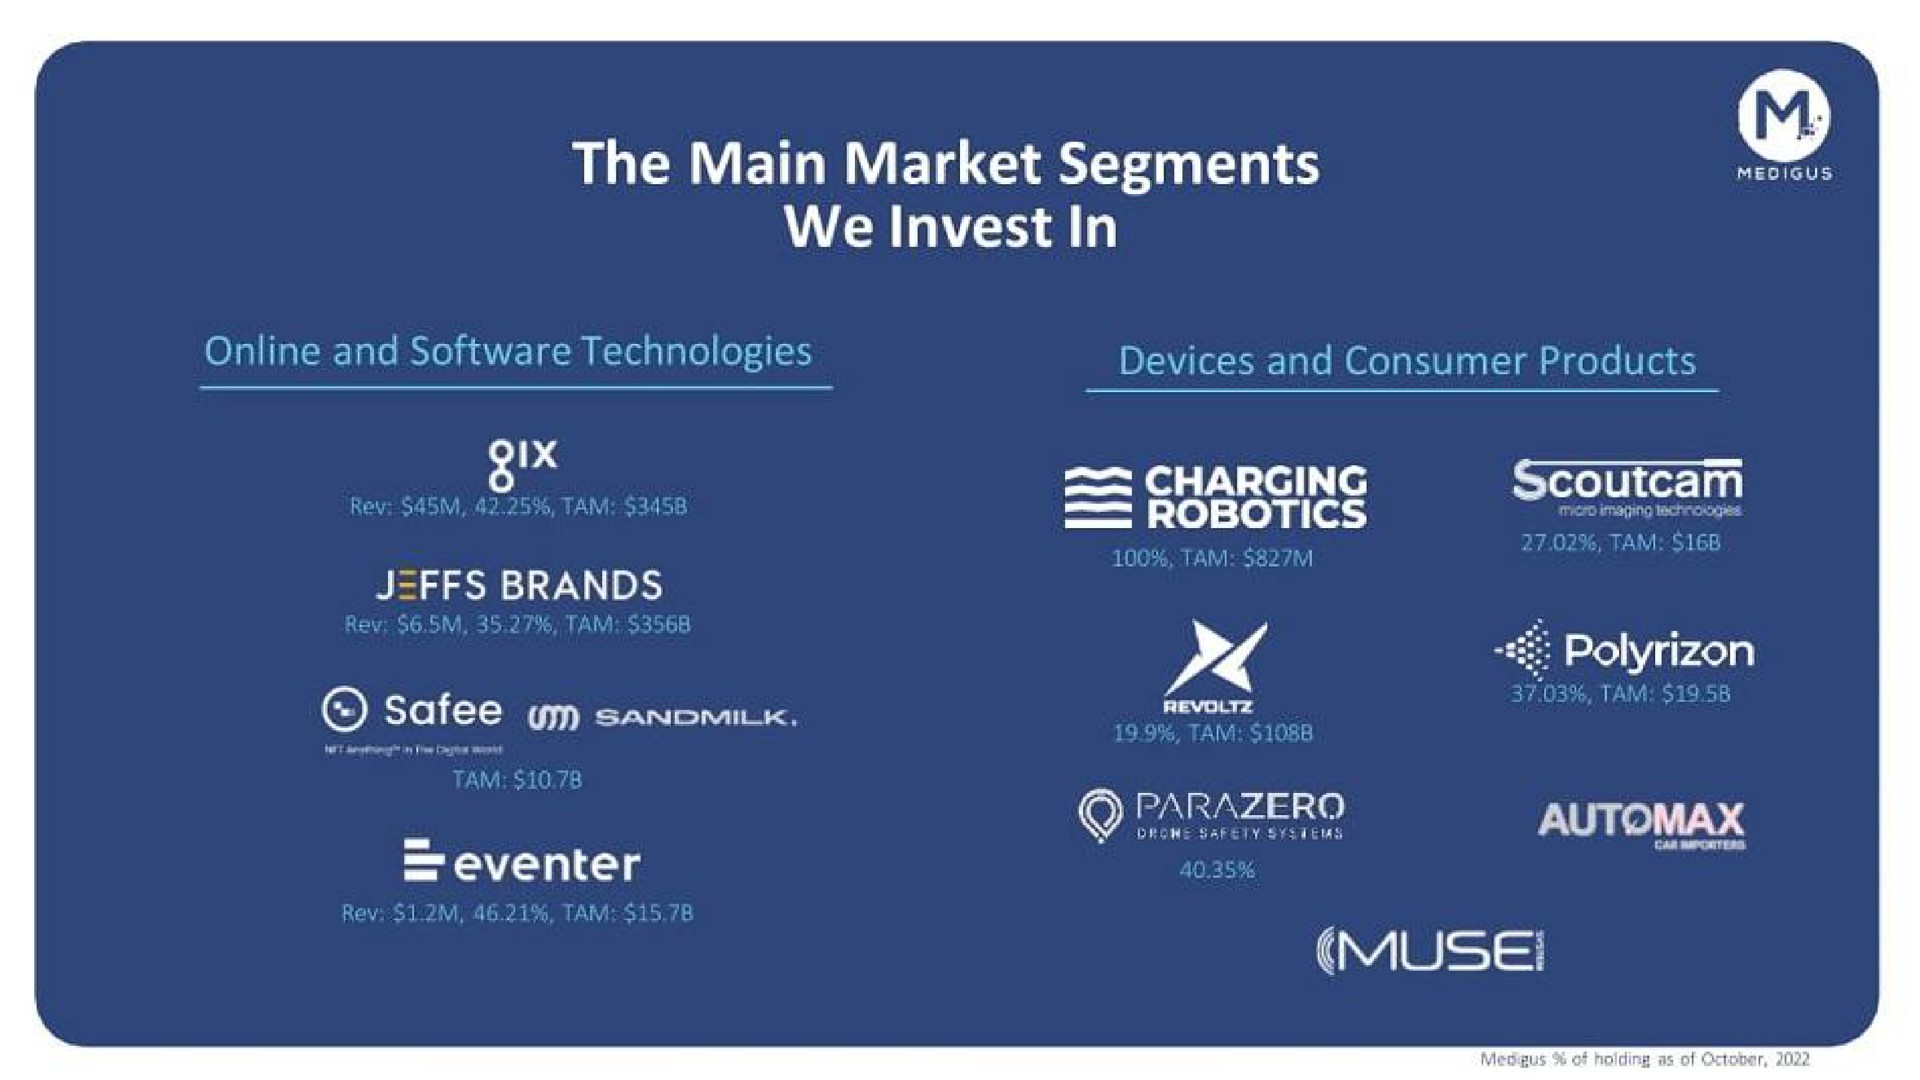 the main market segments we invest in tot charging tam muse i | Medigus